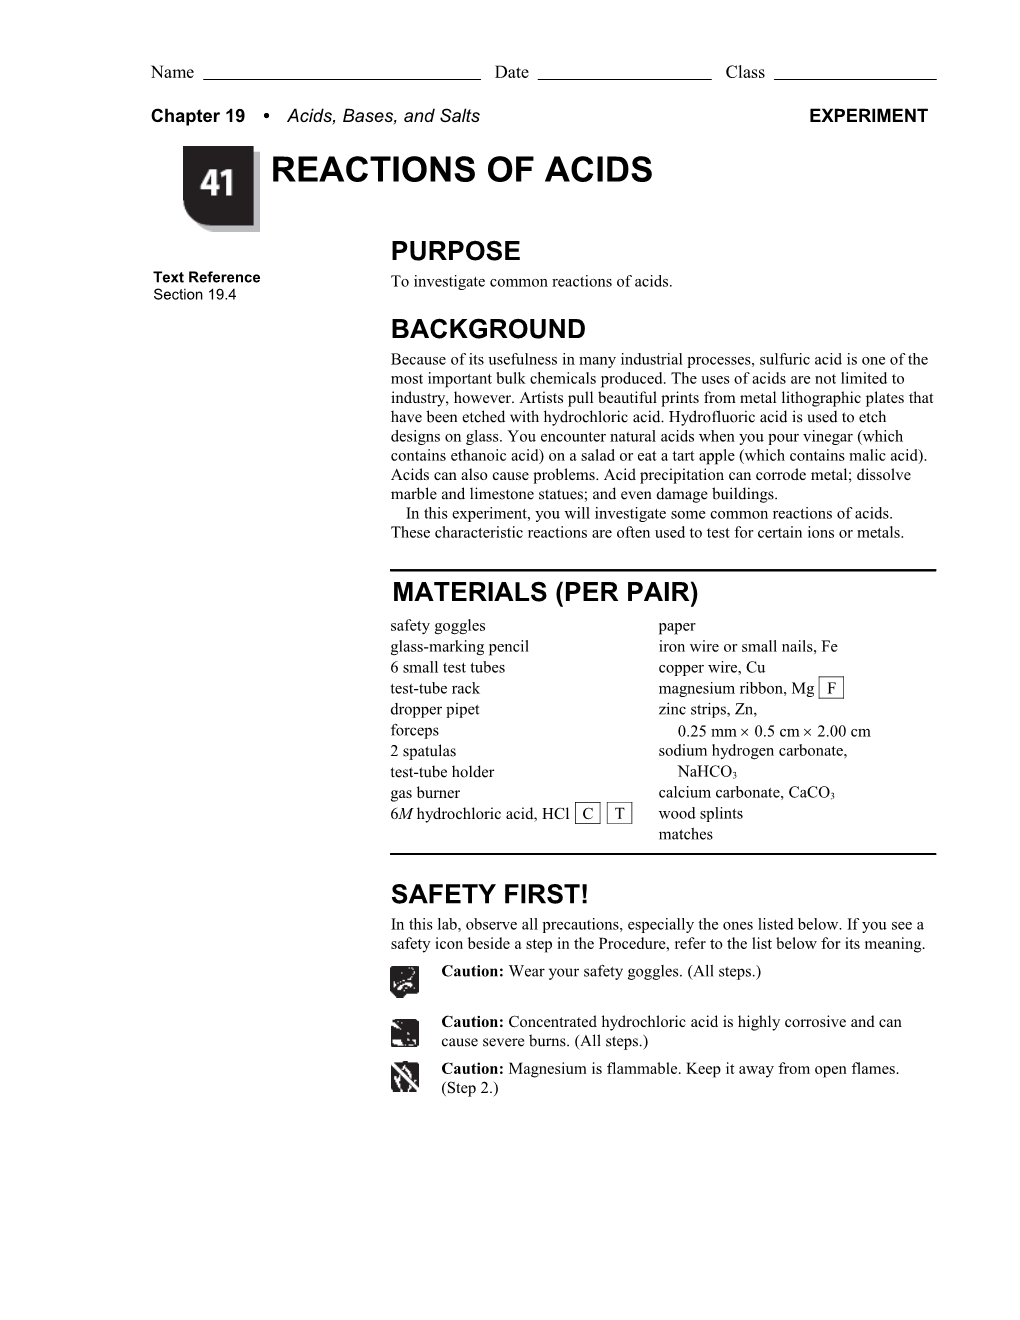 Chapter 19 Acids, Bases, and Saltsexperiment